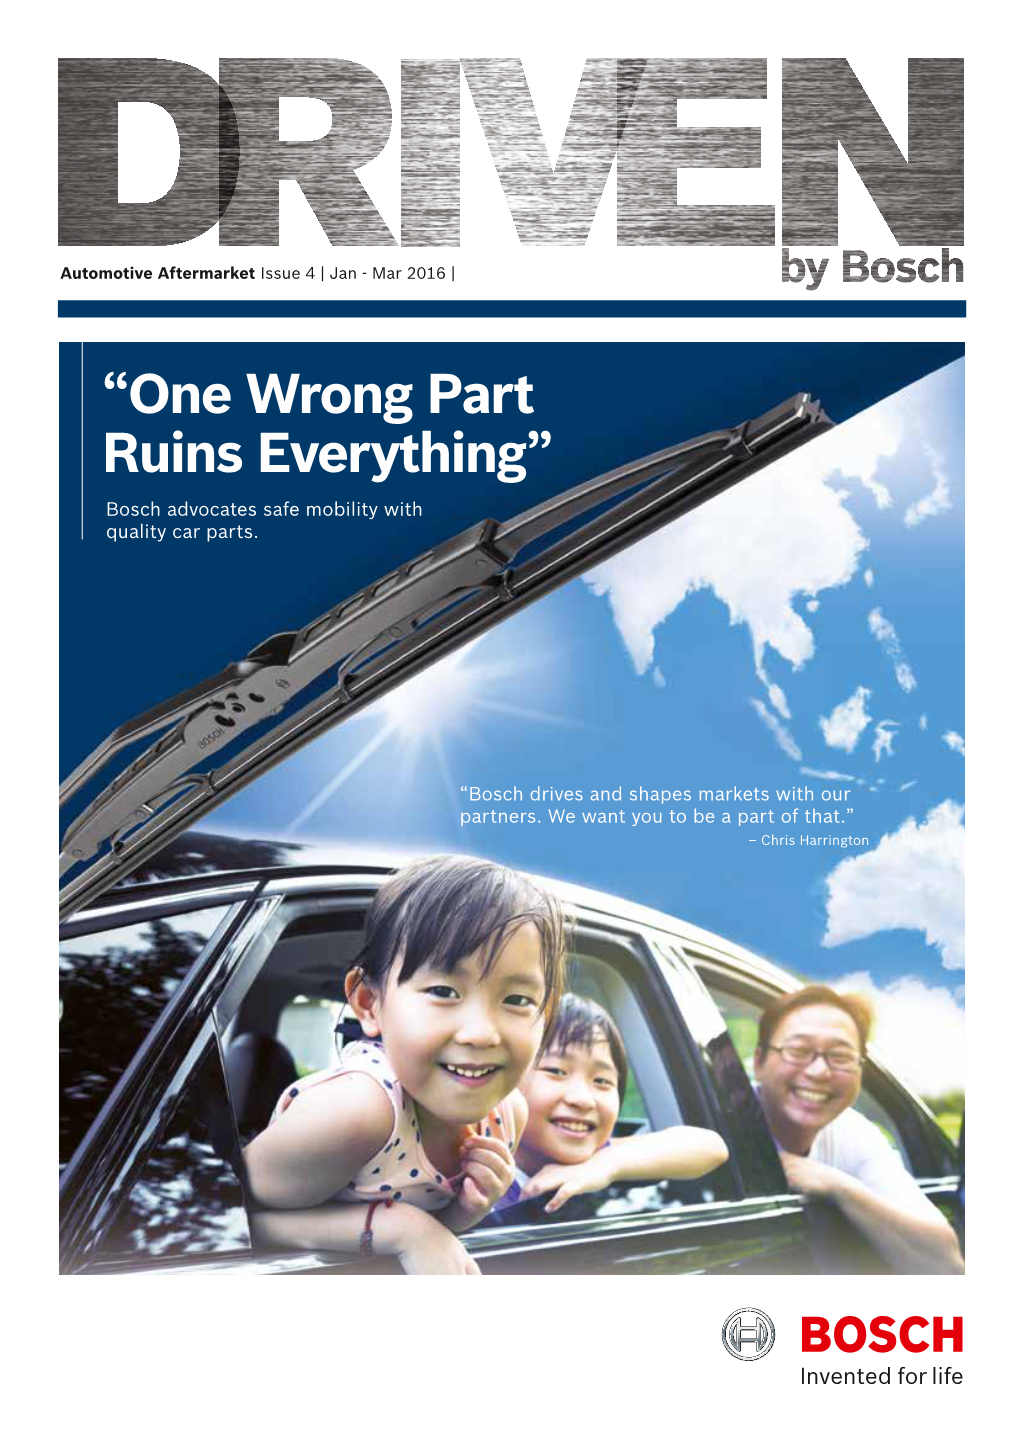 “One Wrong Part Ruins Everything” Bosch Advocates Safe Mobility with Quality Car Parts